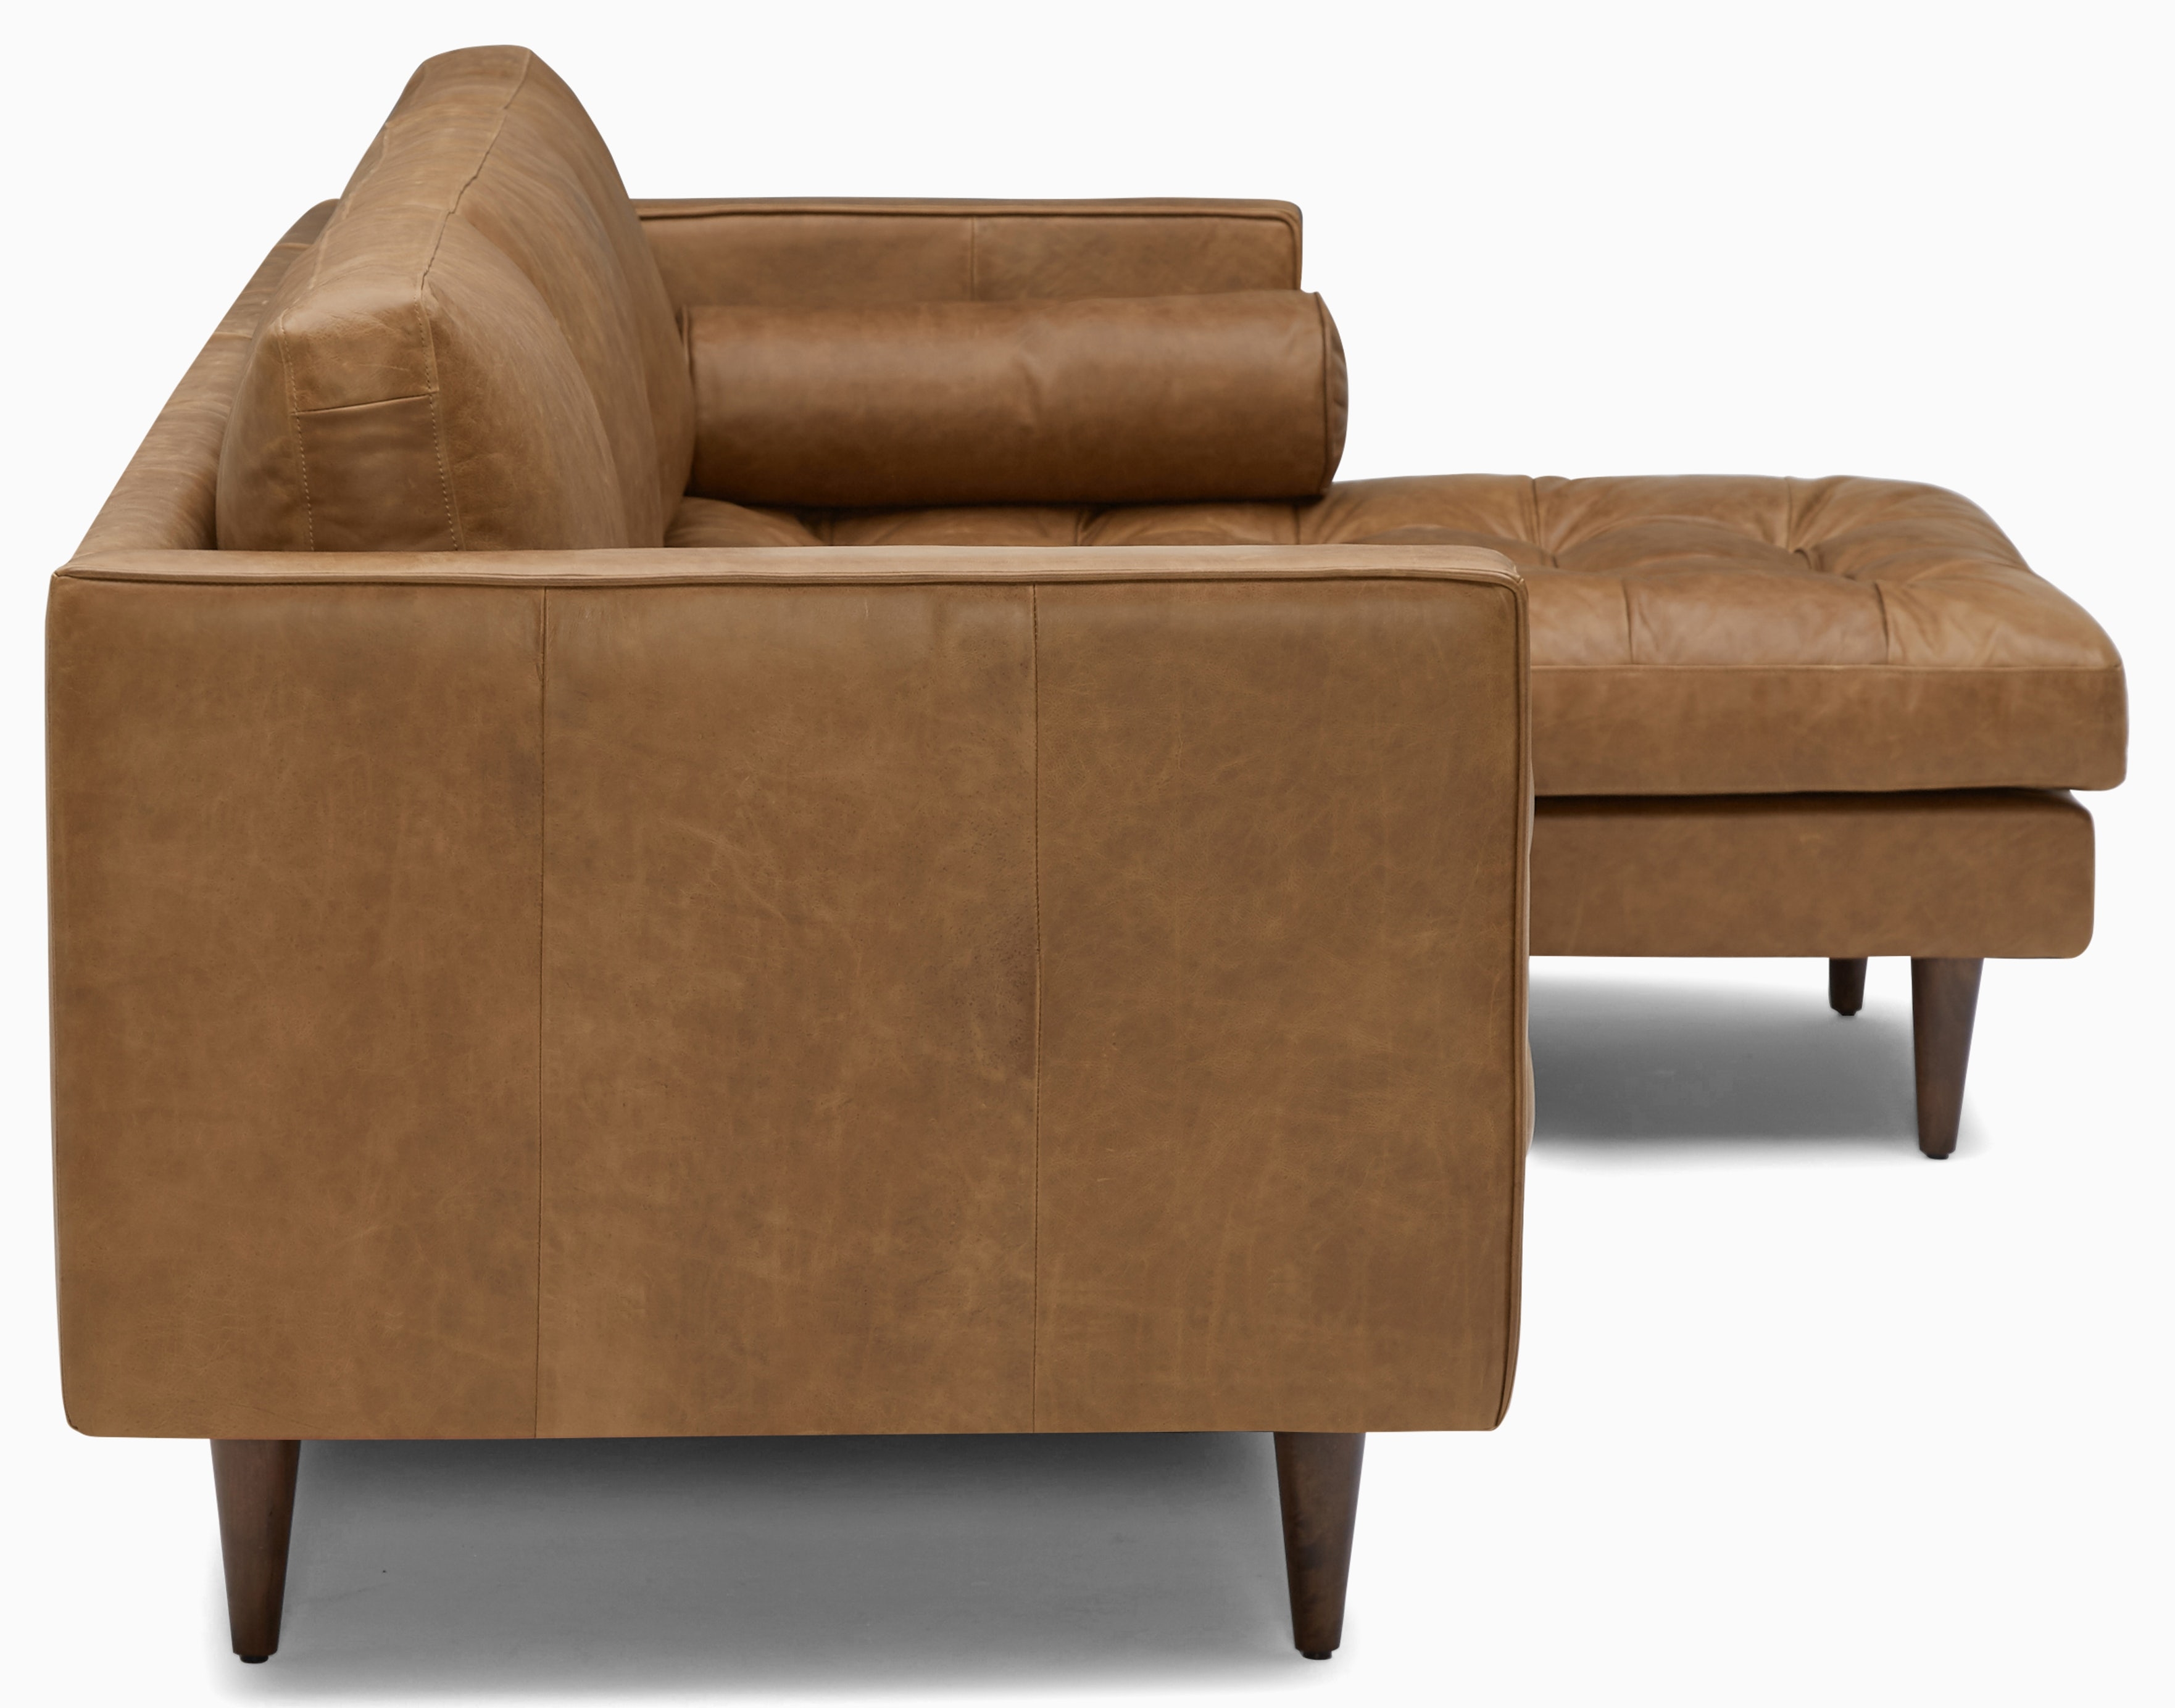 Briar Leather Sectional - Image 1